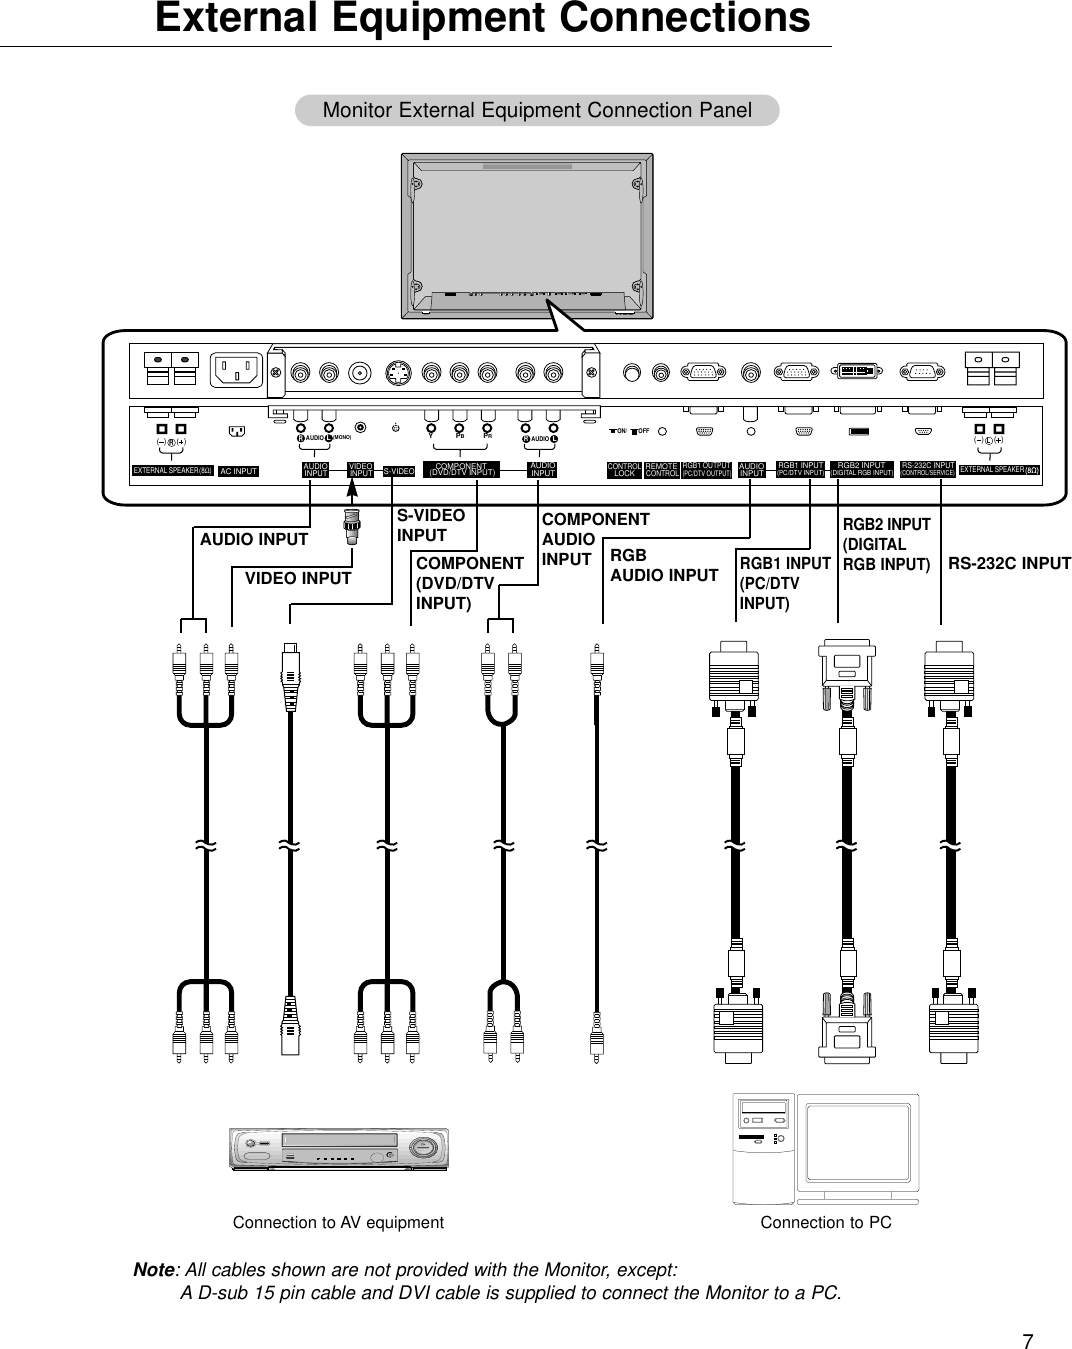 7External Equipment ConnectionsConnection to PCNote: All cables shown are not provided with the Monitor, except:A D-sub 15 pin cable and DVI cable is supplied to connect the Monitor to a PC.Connection to AV equipmentYPBPR(  )(  )R(MONO)RAUDIO ON/ OFFLRAUDIOL(  )(  )LAC INPUT(8Ω)EXTERNAL SPEAKERCOMPONENT(DVD/DTV INPUT)RGB1 OUTPUT(PC/DTV OUTPUT)LOCKREMOTECONTROLCONTROLRGB1 INPUT(PC/DTV INPUT)INPUTAUDIOINPUTAUDIOINPUTAUDIO INPUTVIDEORGB2 INPUT(DIGITAL RGB INPUT) RS-232C INPUT(CONTROL/SERVICE)S-VIDEOEXTERNAL SPEAKERAUDIO INPUTVIDEO INPUT COMPONENT(DVD/DTVINPUT)S-VIDEOINPUT COMPONENTAUDIO INPUT RGBAUDIO INPUTRGB1 INPUT(PC/DTV INPUT)RGB2 INPUT(DIGITALRGB INPUT)RS-232C INPUTMonitor External Equipment Connection Panel